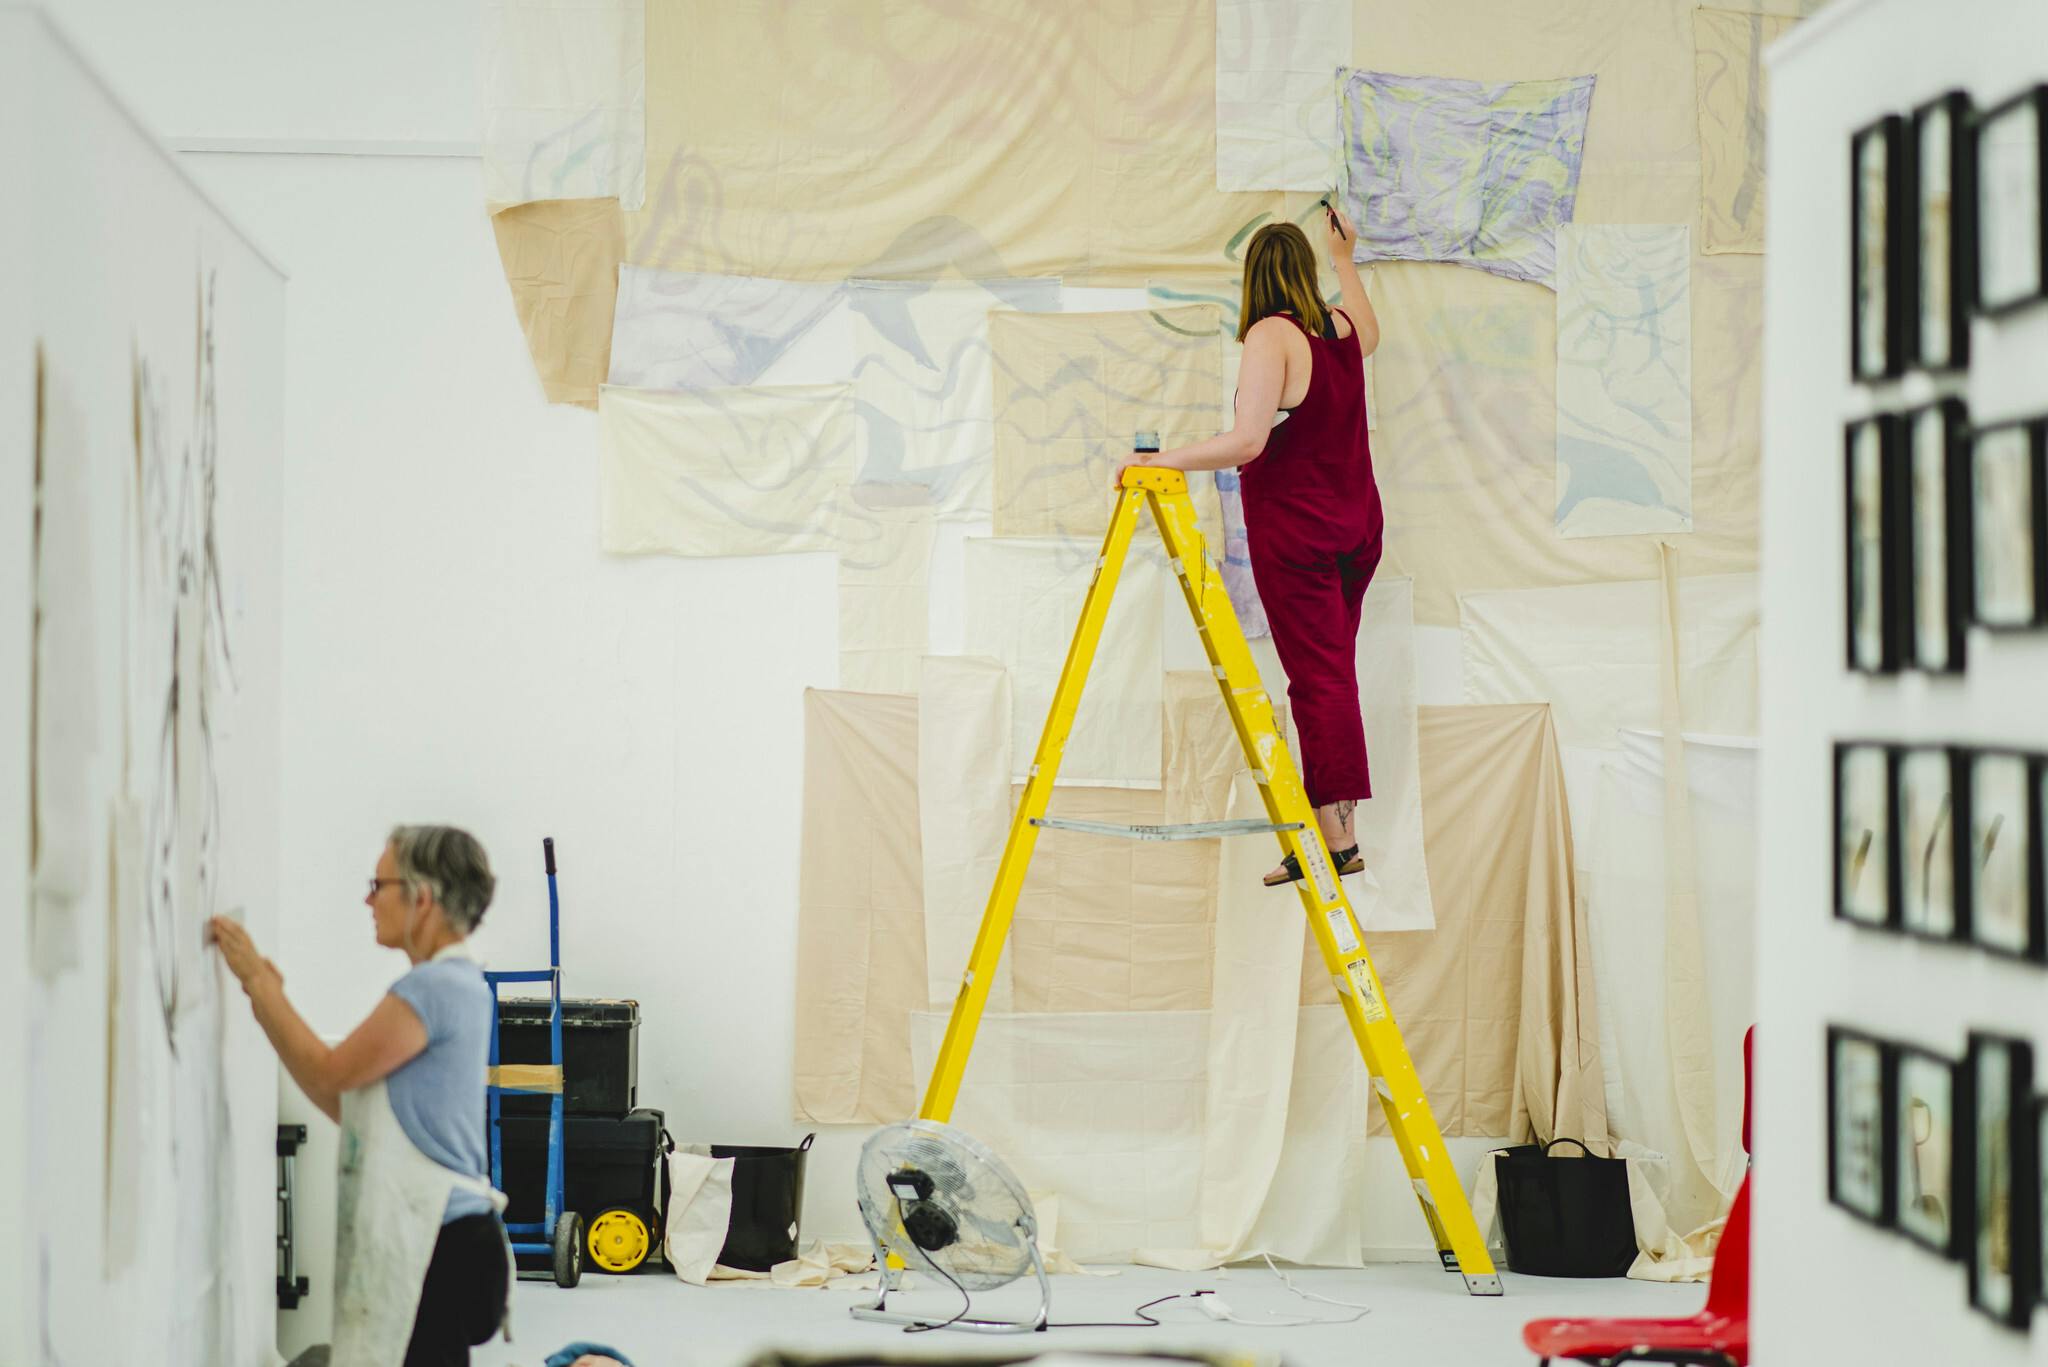 Two female students take over the postgraduate studios, one up a bright yellow ladder layering neutral shades of cloth and paper, the other kneeling on the floor to carefully pin her work.